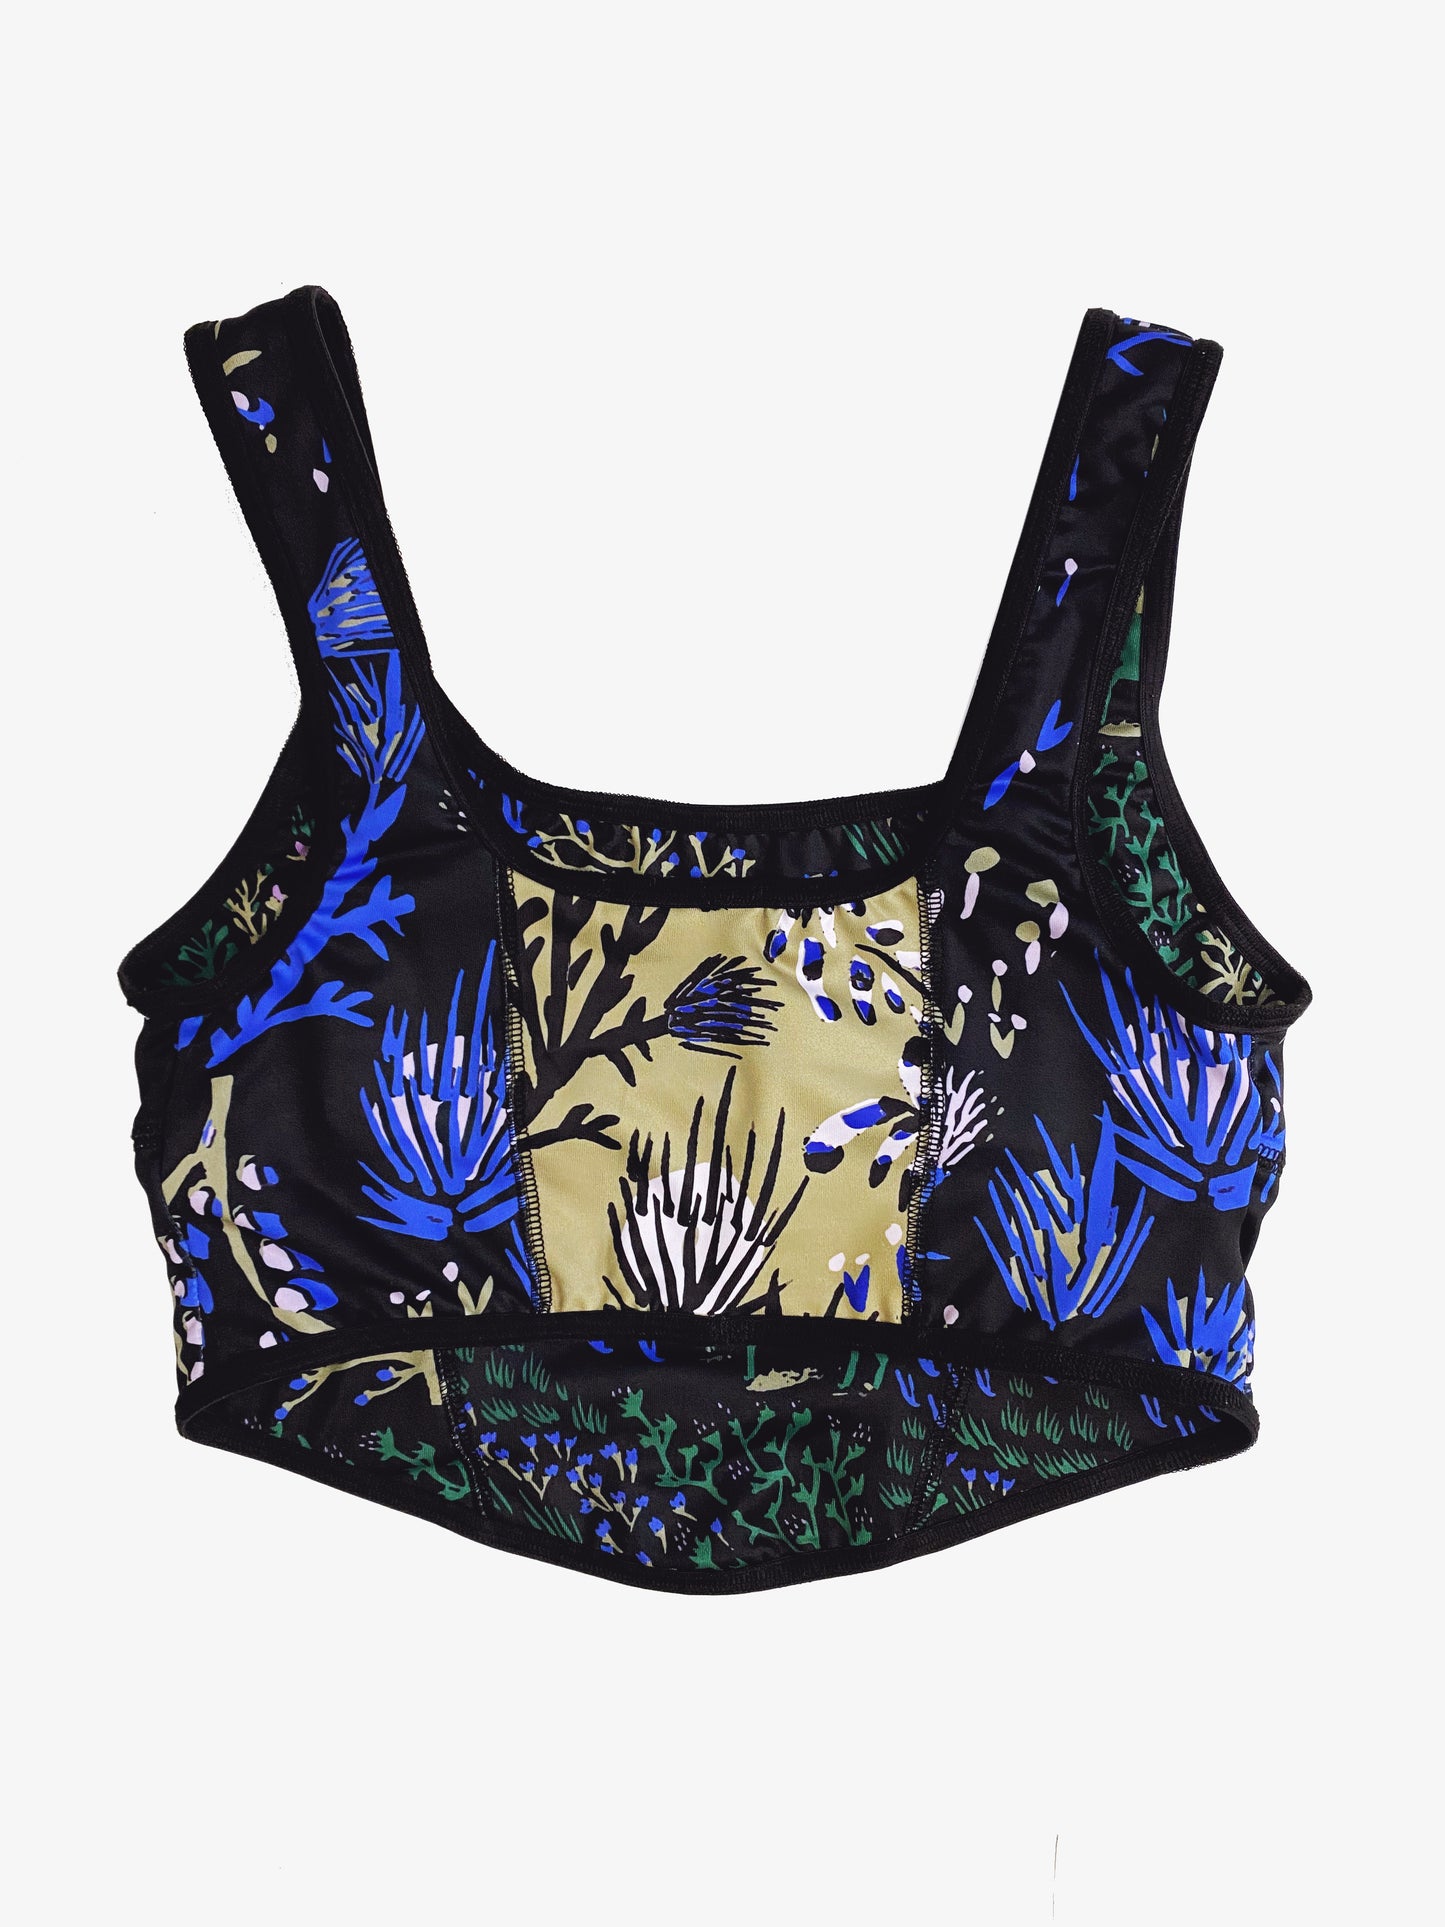 Reversible Patchwork Swim Corset in Wild Horses and Thistle Prints in Size Small